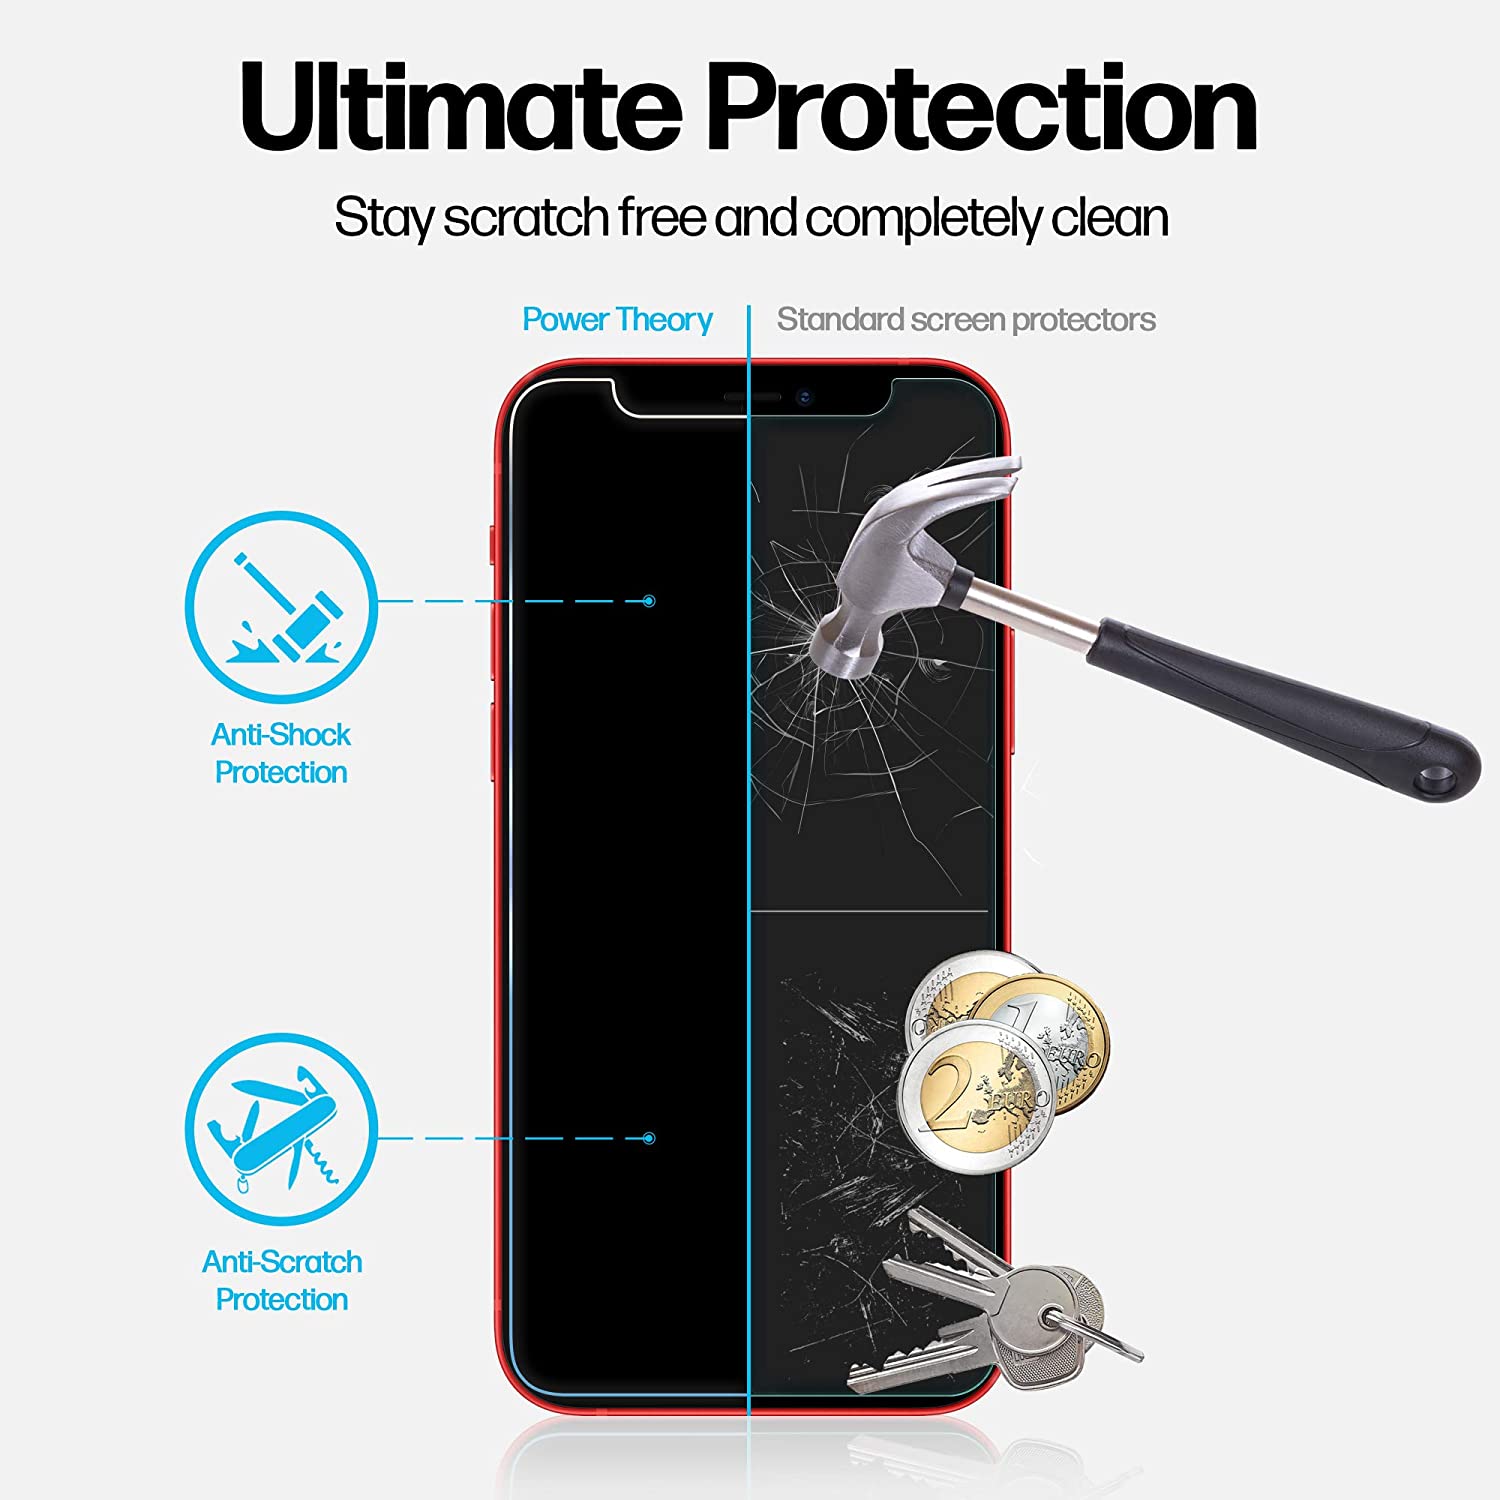 iPhone 12 Pro / iPhone 12 Tempered Glass Screen Protector [2-Pack]